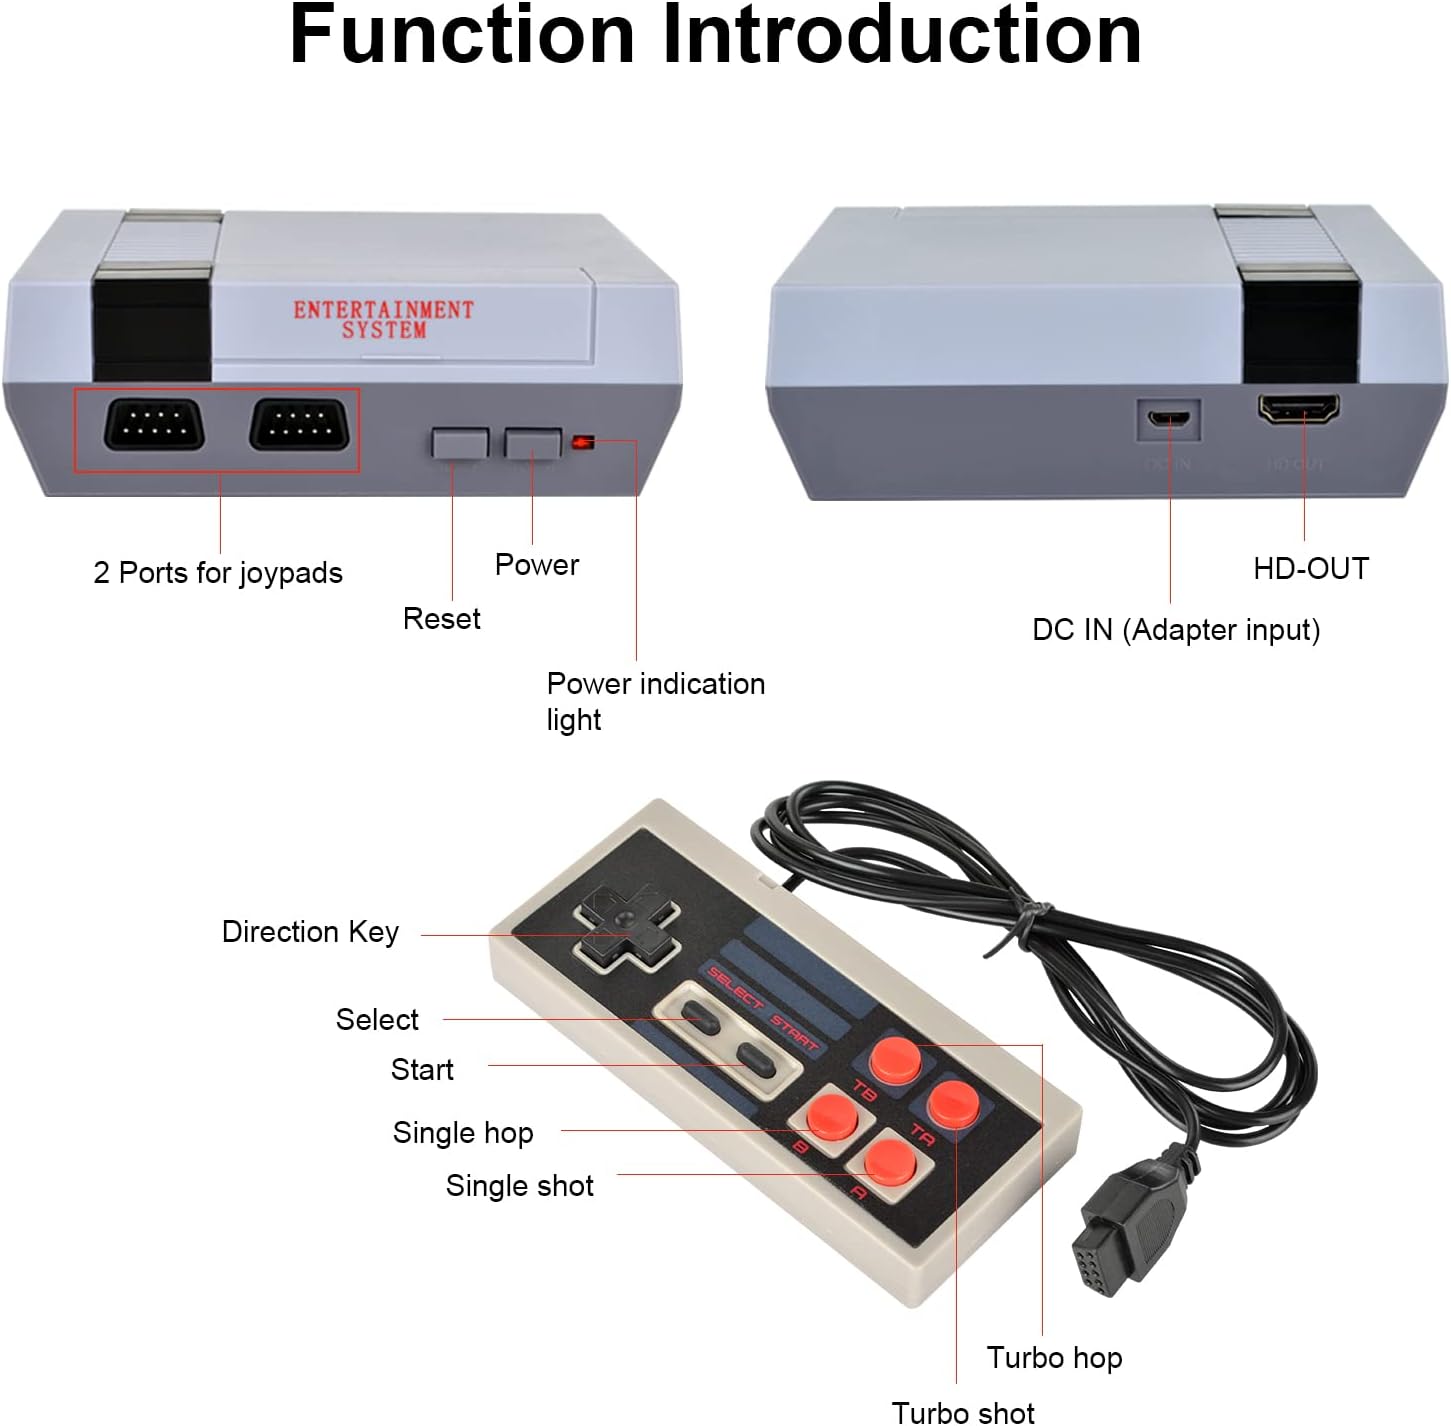 Retro Game Console Mini Classic Game System Built-in 620 Classic Video Games Plug and Play TV Games with 2X 4 Classic Edition Controller for Kids and Adults AV Output